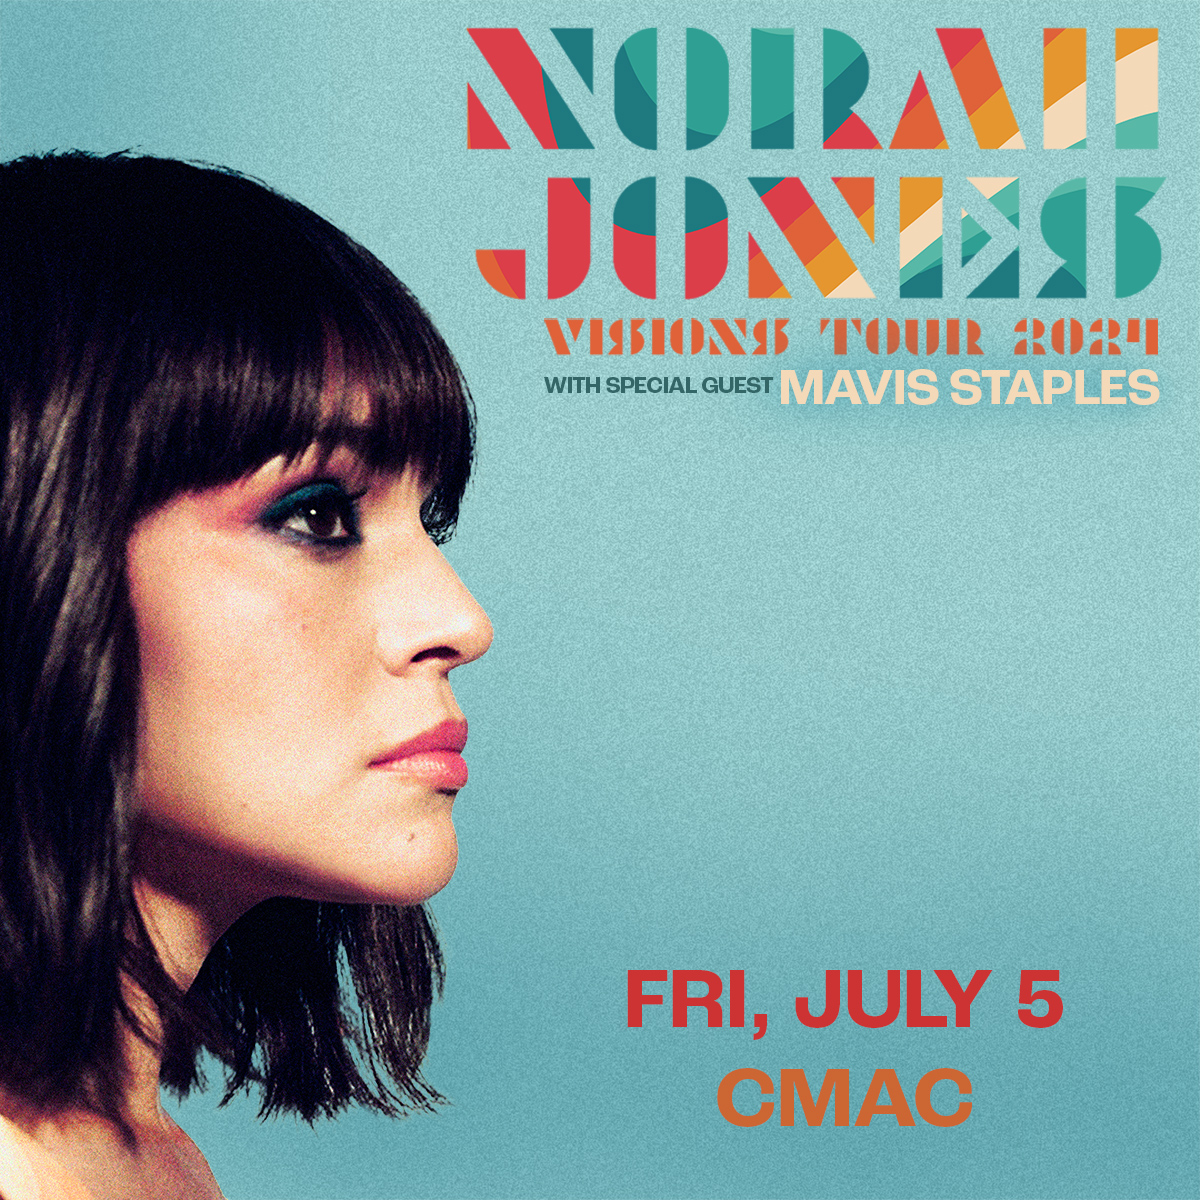 Get your presale tickets for @NorahJones at CMAC on July 5th using the code BOWERY at ticketmaster.com🎤🎟 #norahjones #CMAC #concert